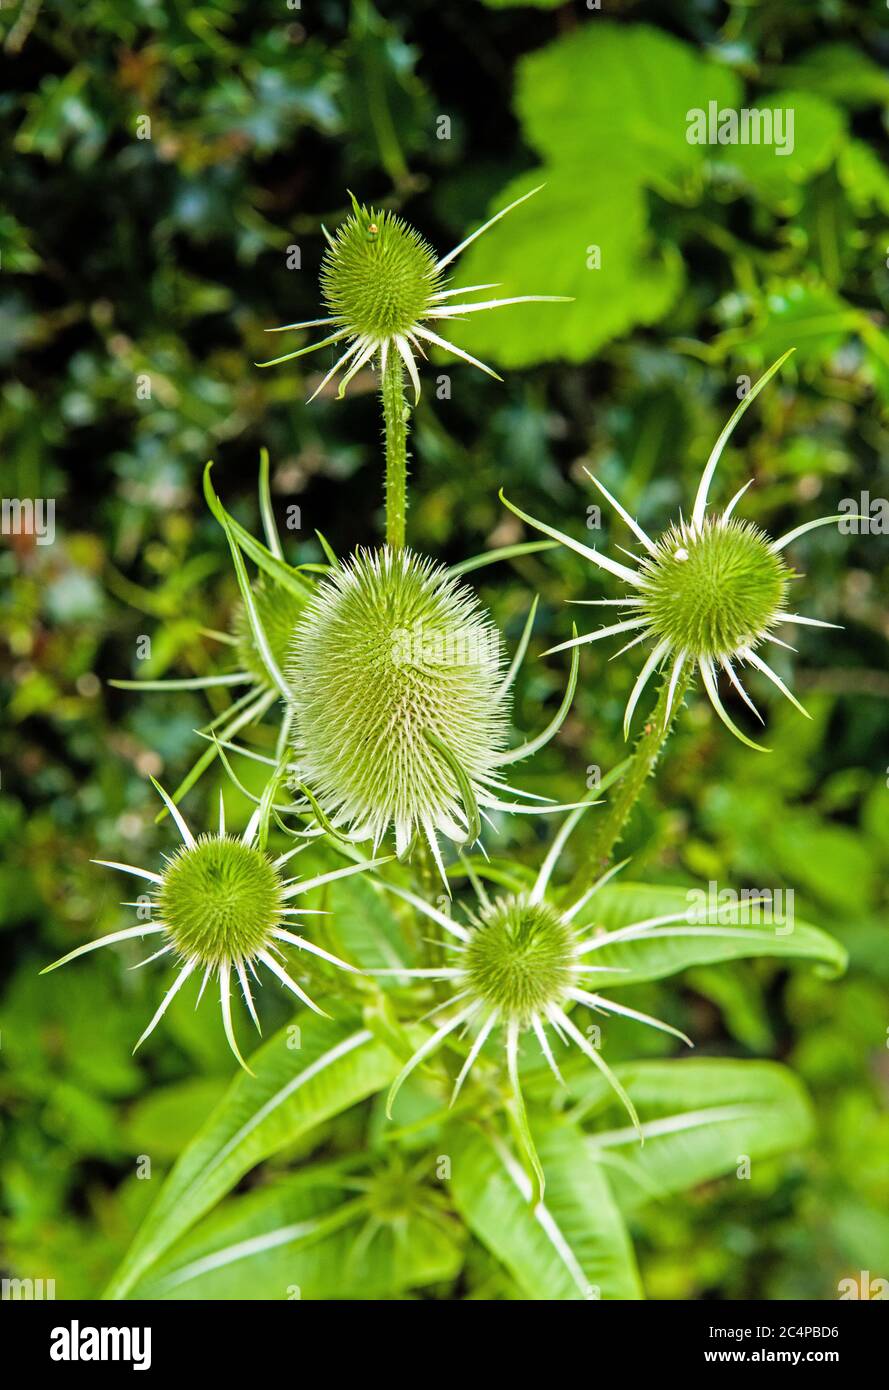 A Spring teasel plant wth the teasels still green from the Spring. The latin name is Dipsacus fullonum. In autumn/late summer the teasels turn brown Stock Photo